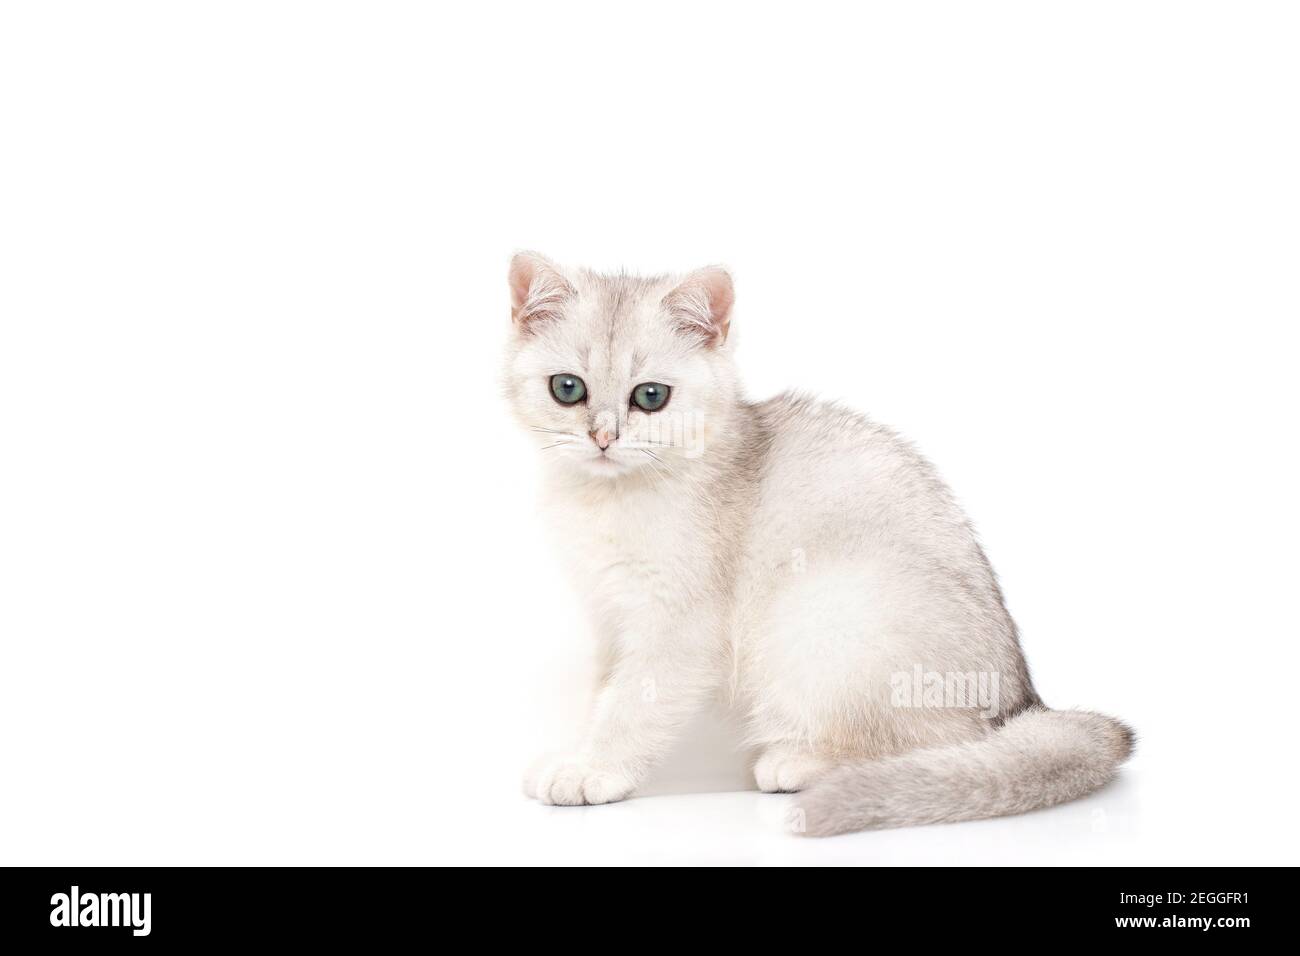 White with gray beautiful kitten of British breed sits on a white background. Stock Photo